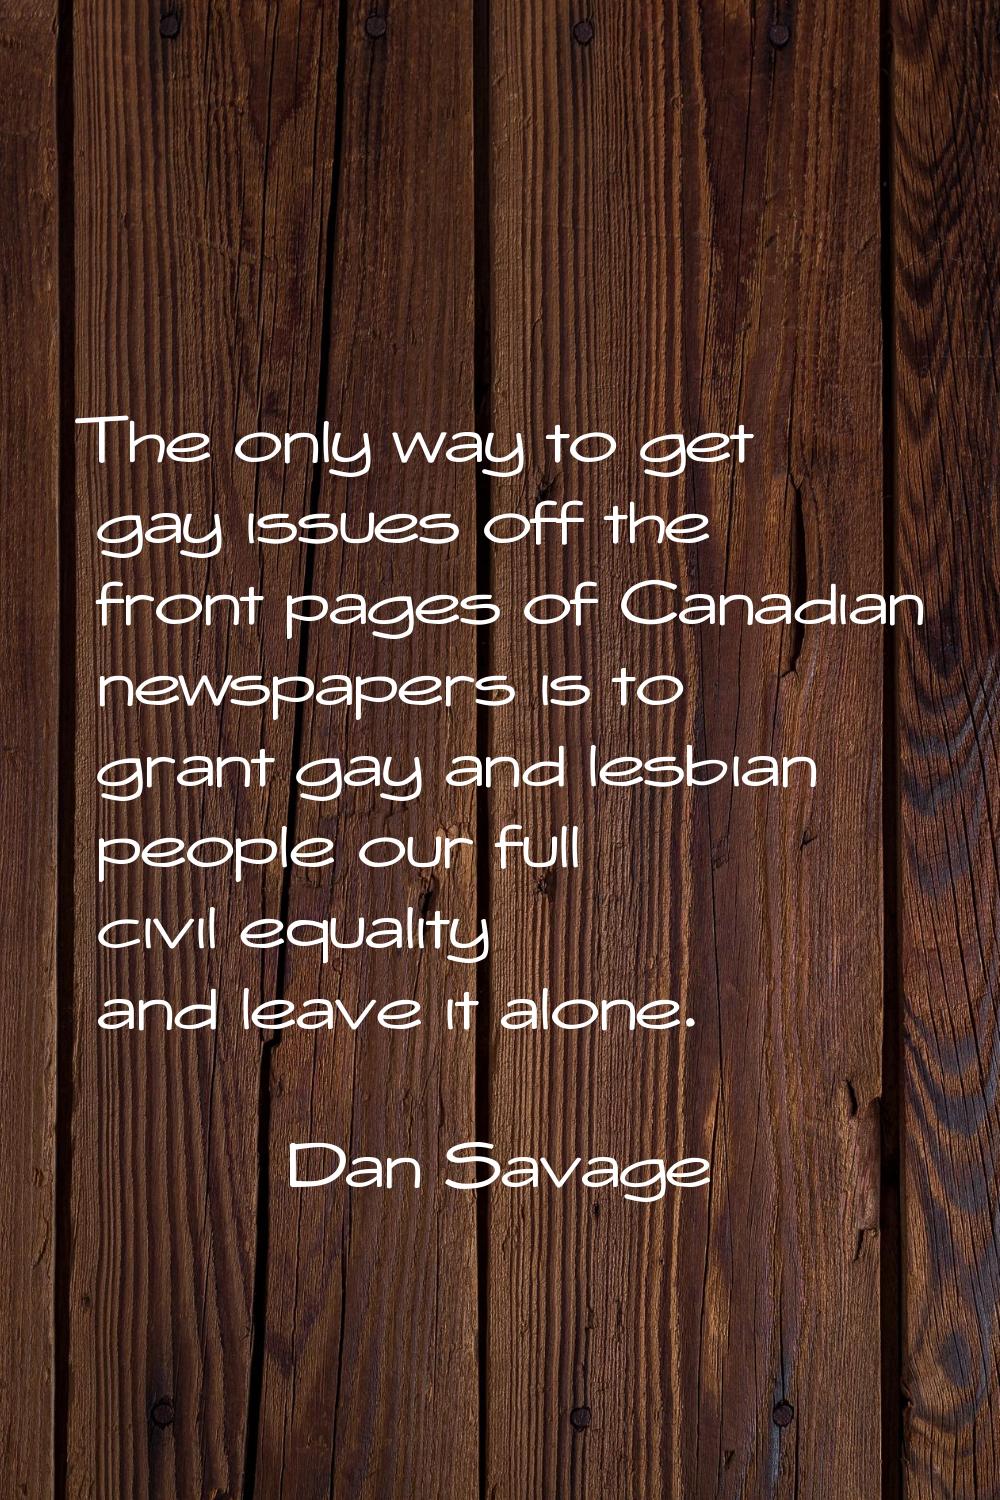 The only way to get gay issues off the front pages of Canadian newspapers is to grant gay and lesbi